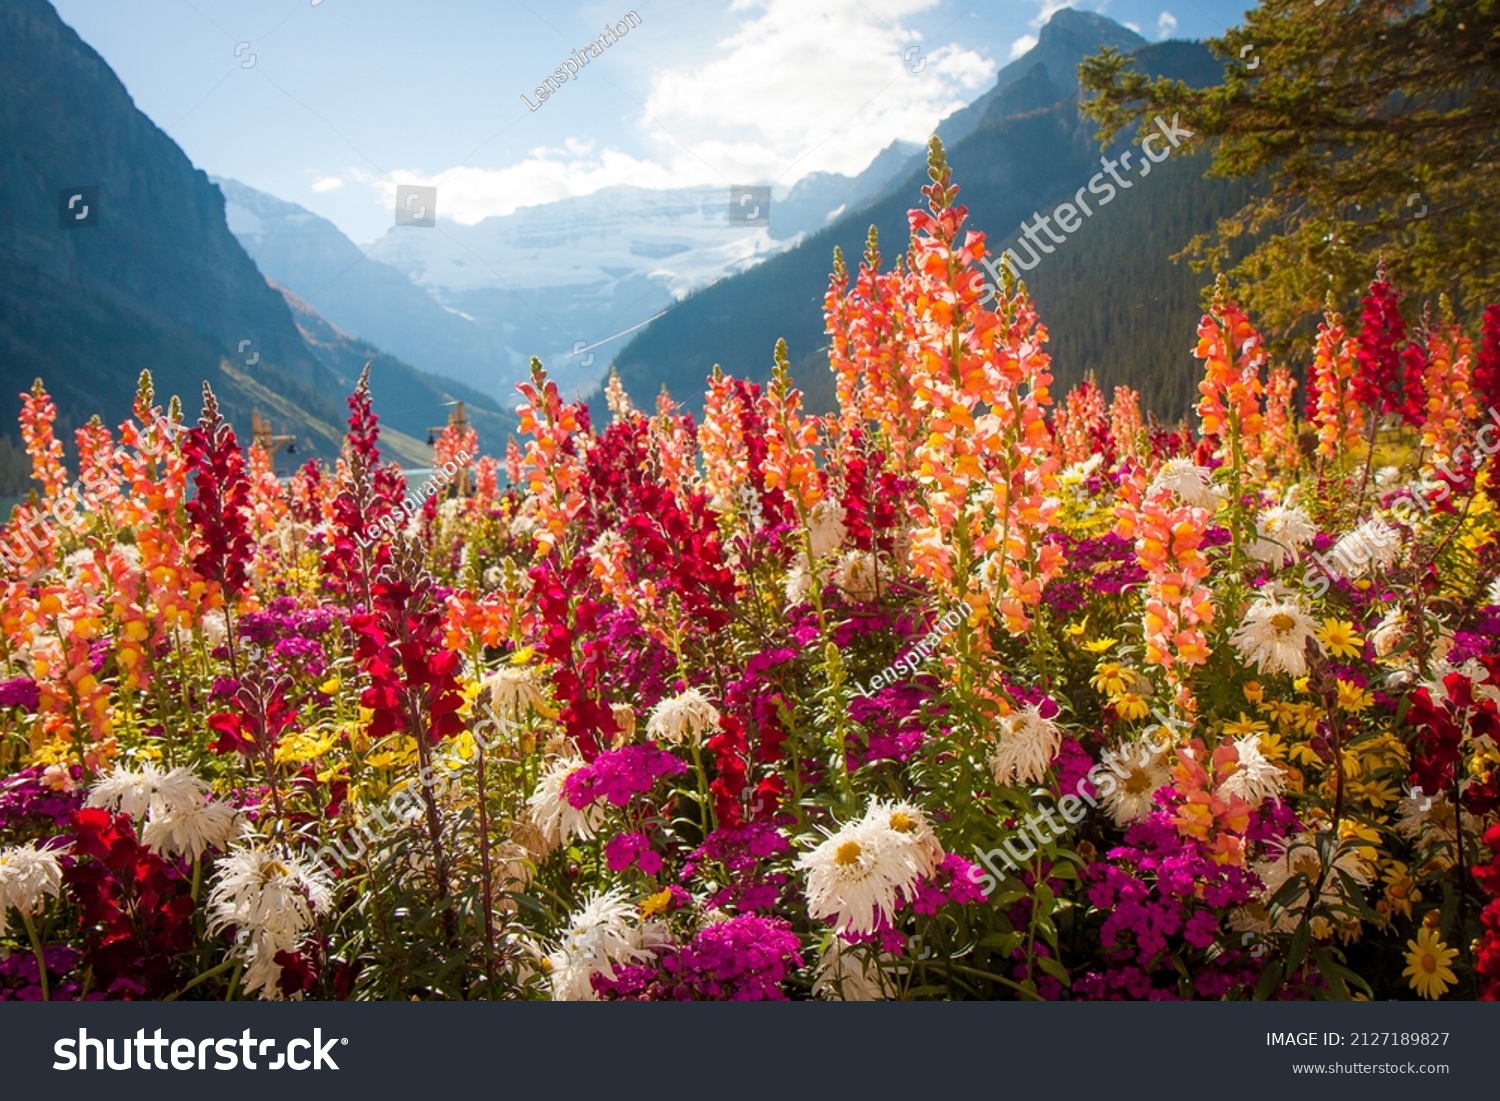 Tall colorful wild flowers in front of mountain range outlook in Banff National Park Canada #2127189827